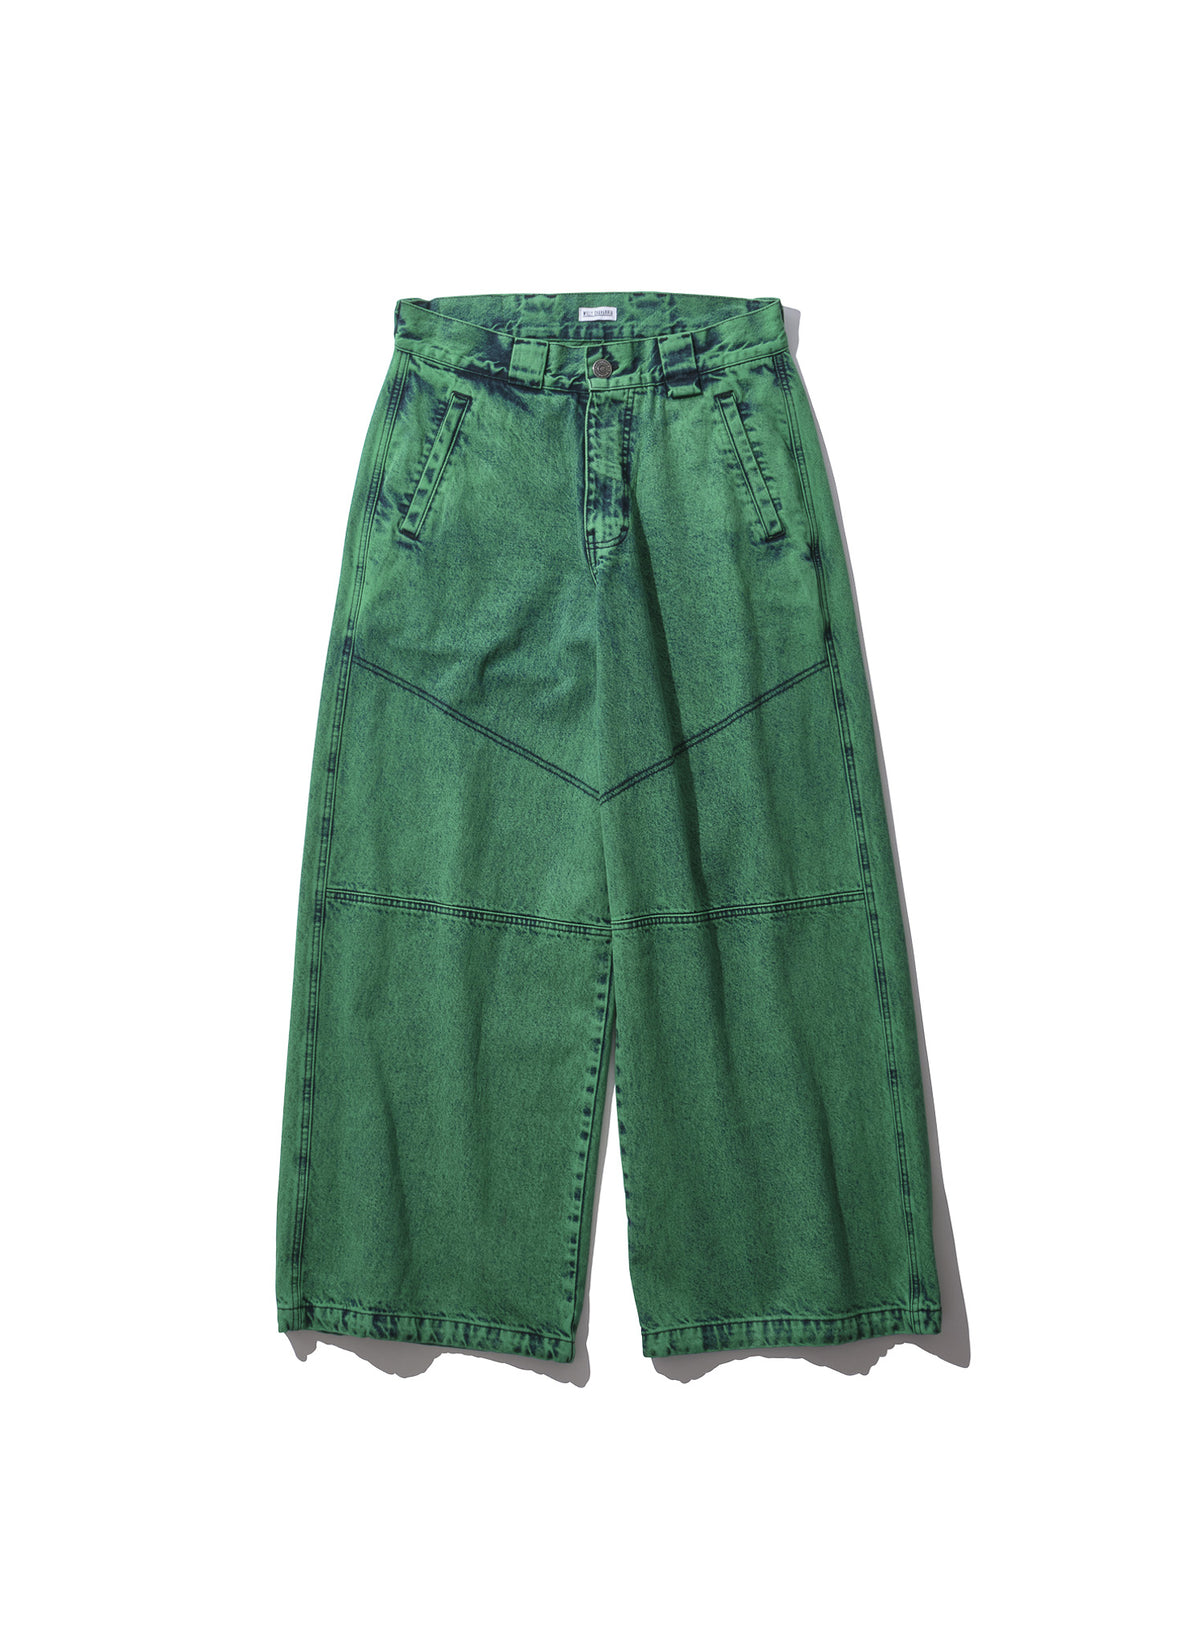 WILLY CHAVARRIA / RAVER PANTS OVERD GREEN